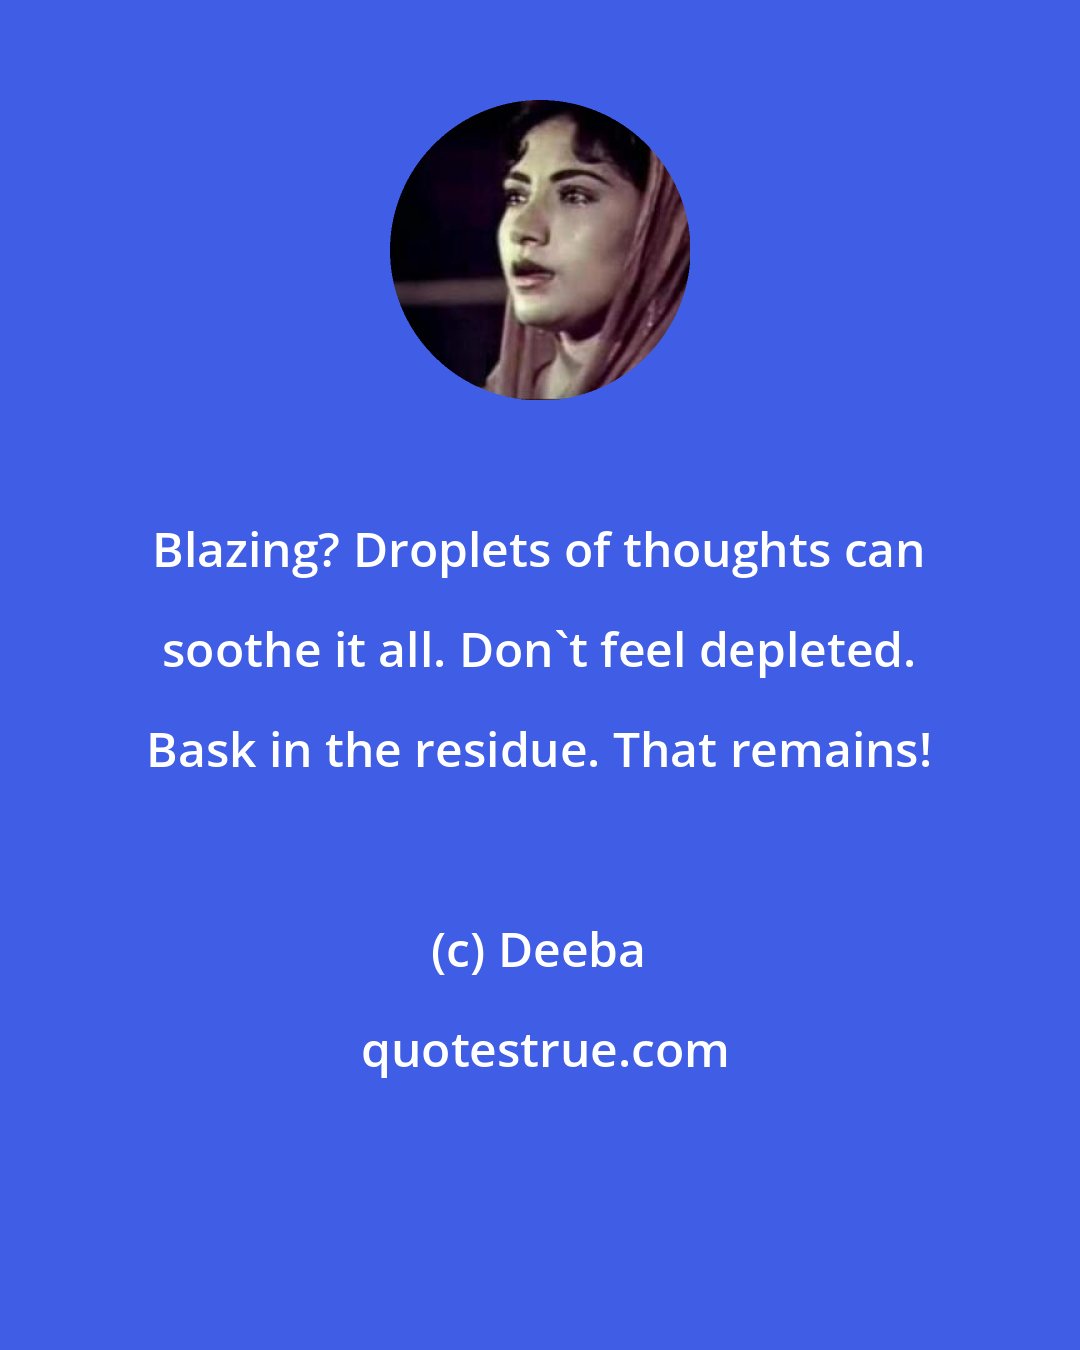 Deeba: Blazing? Droplets of thoughts can soothe it all. Don't feel depleted. Bask in the residue. That remains!